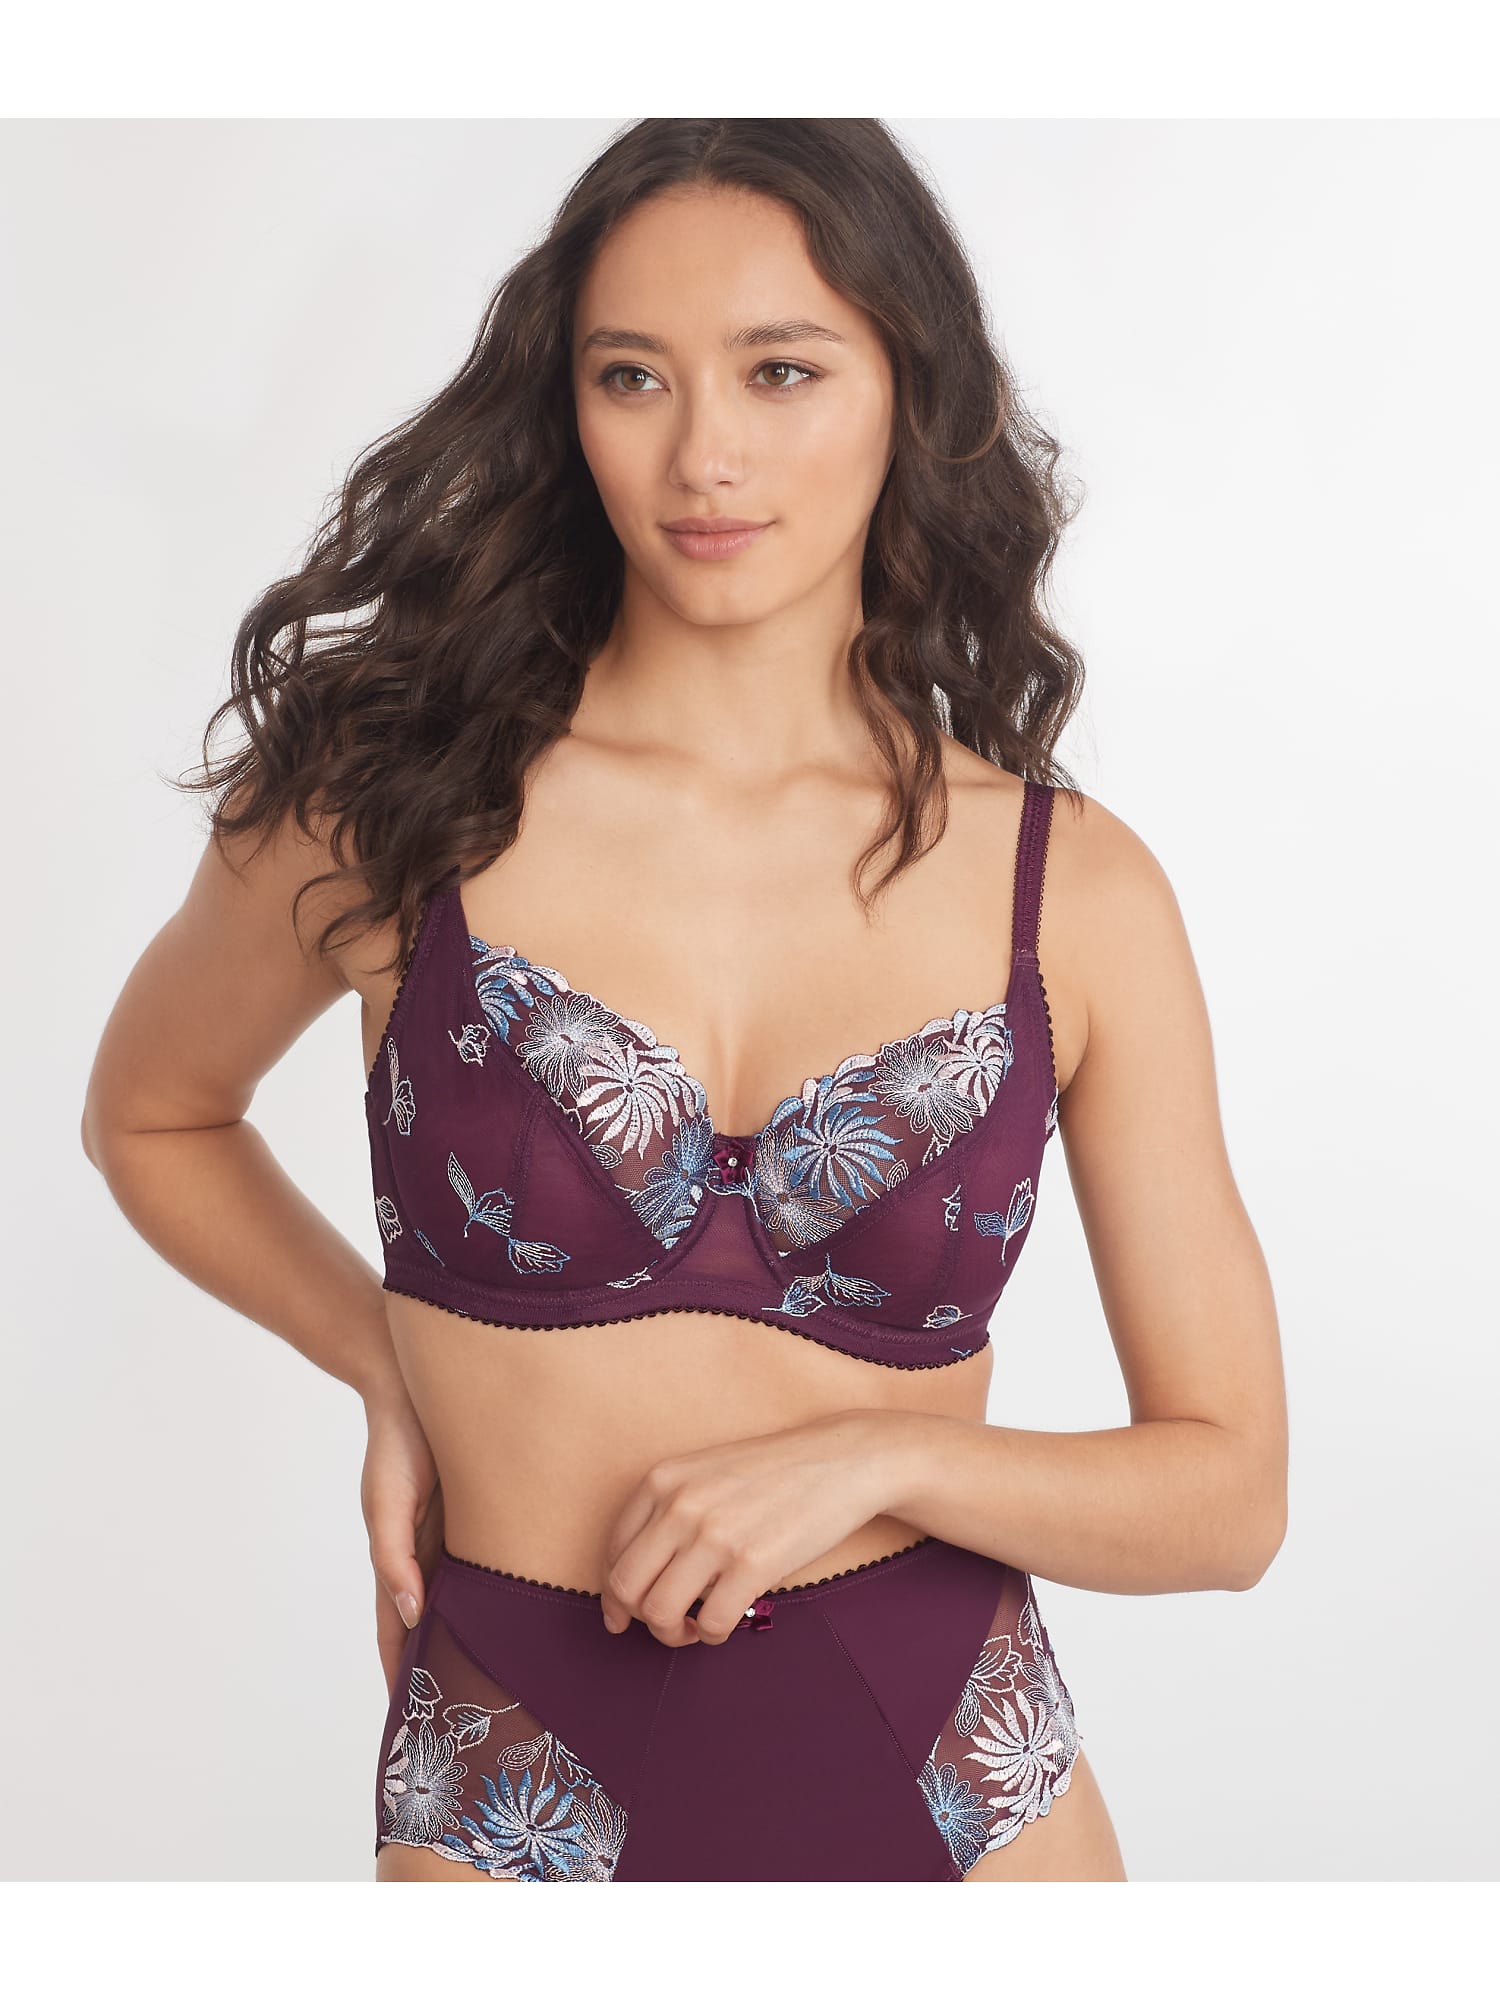 Pour Moi, Bras, Lingerie and Nightwear